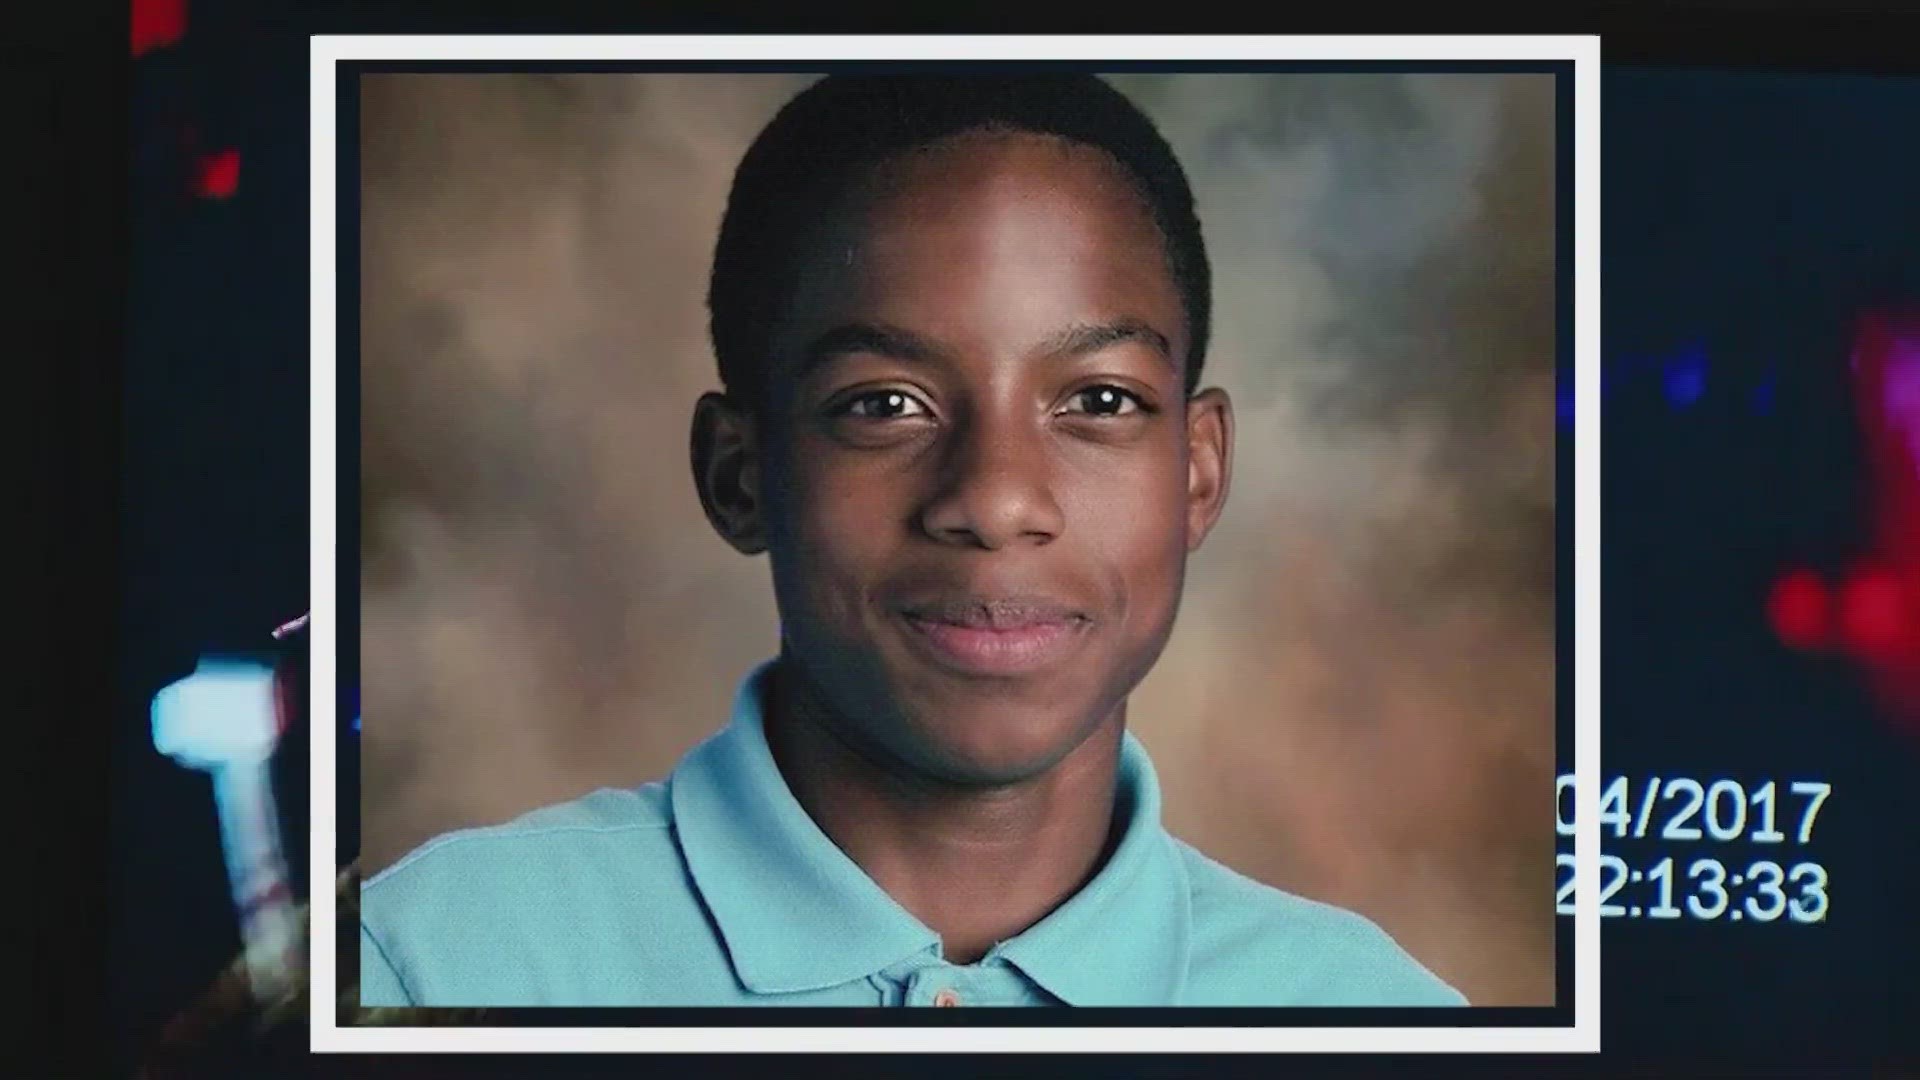 The family of Jordan Edwards claims Oliver has not once apologized for the murder of the 15-year-old boy.